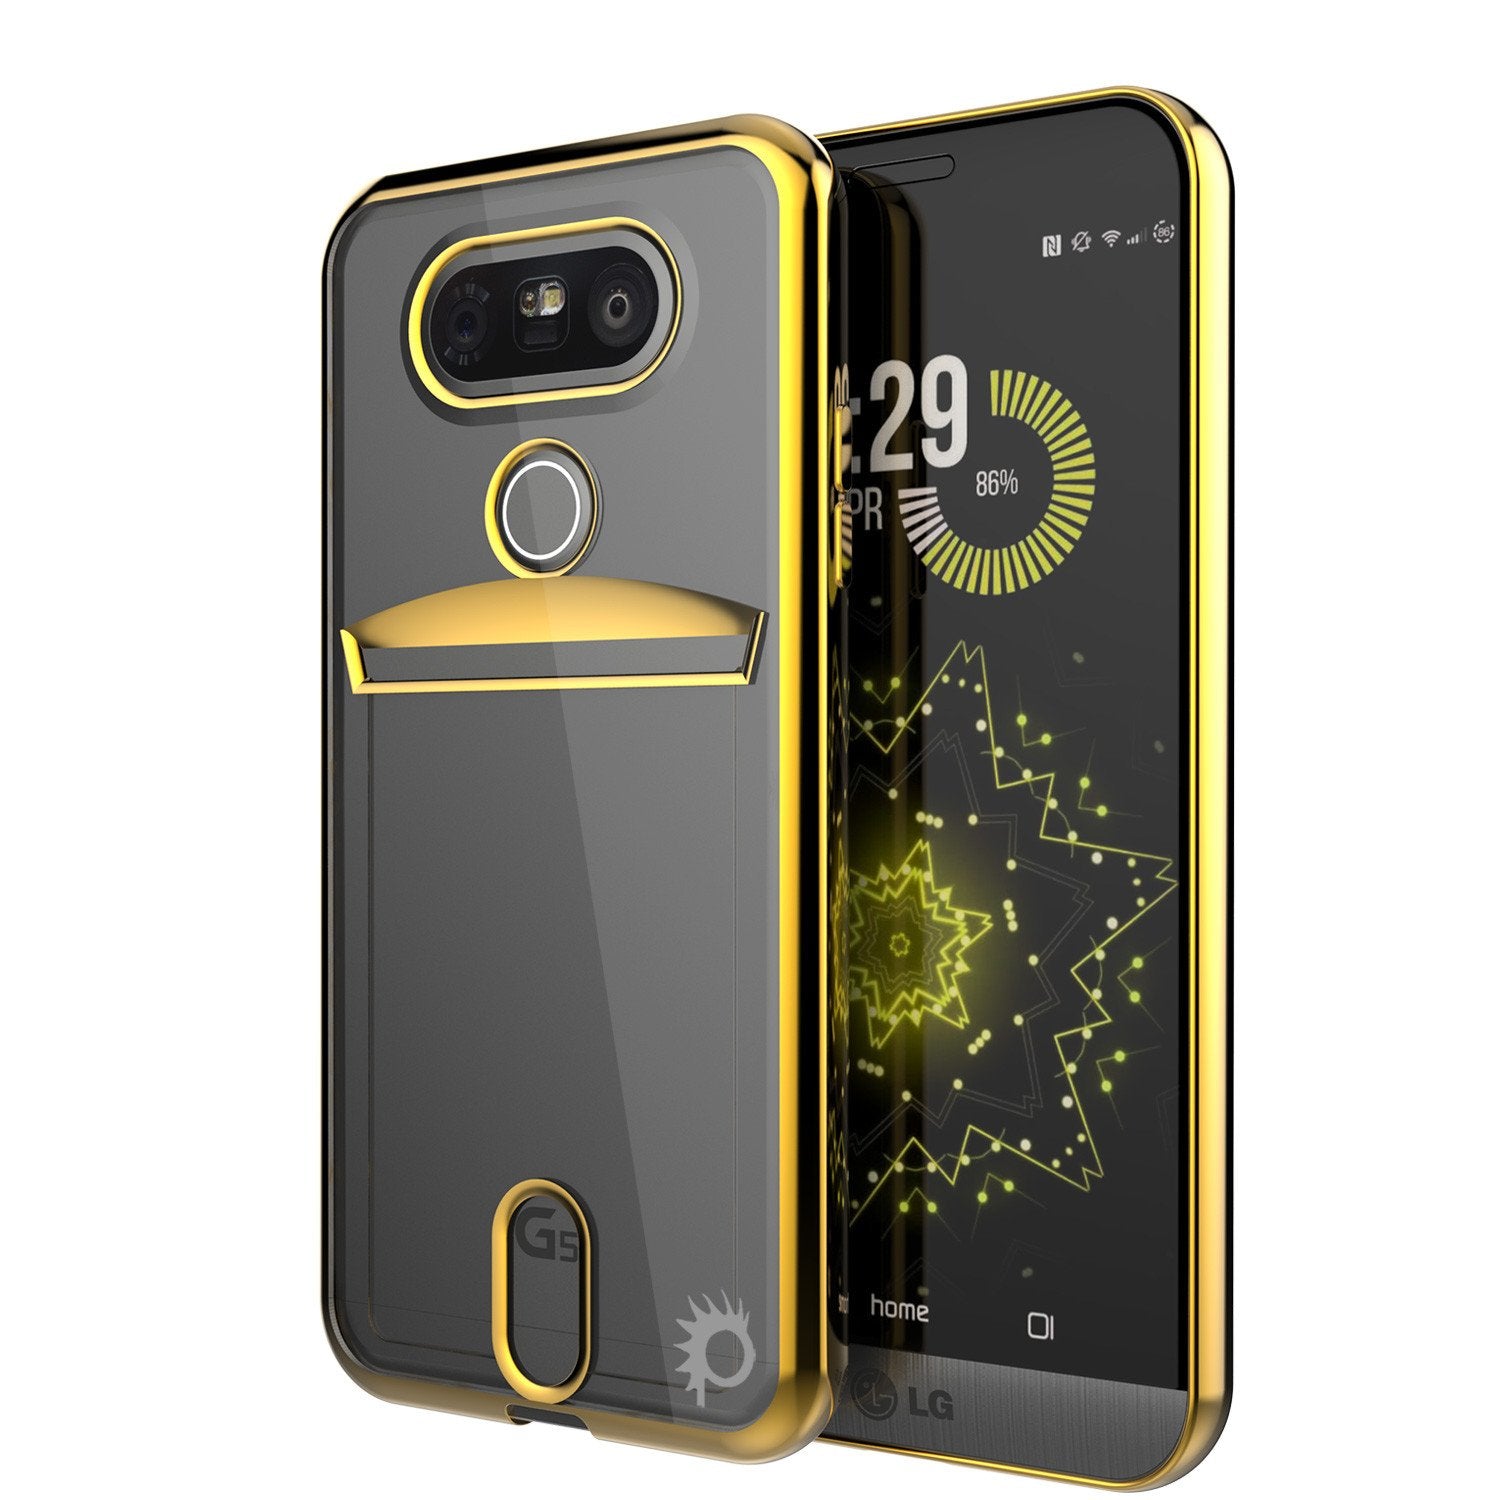 LG G5 Case, PUNKCASE® Gold LUCID Series | Card Slot | PUNK SHIELD Screen Protector | Ultra Fit